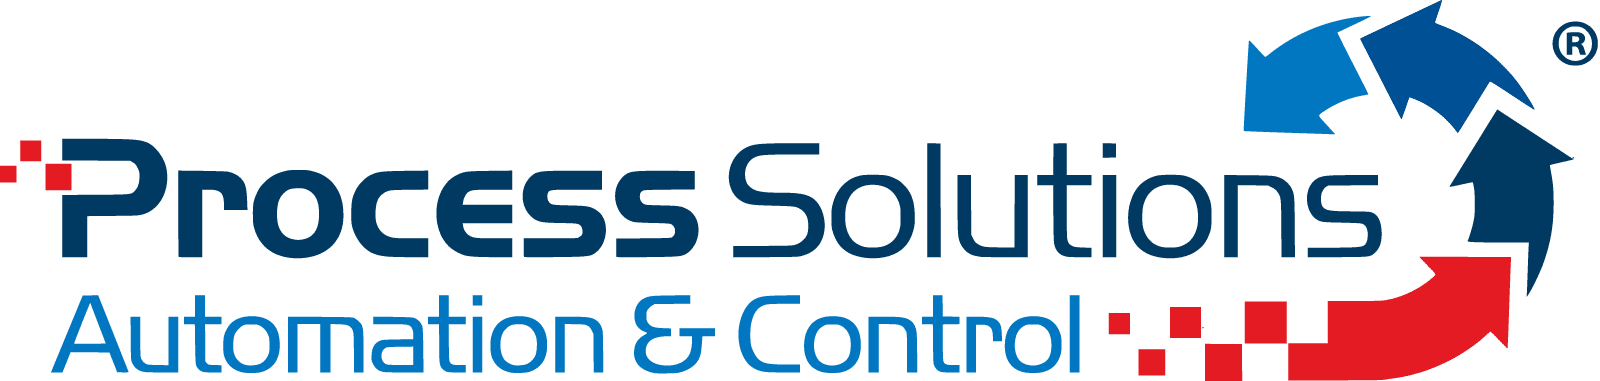 Process Solutions Corp.